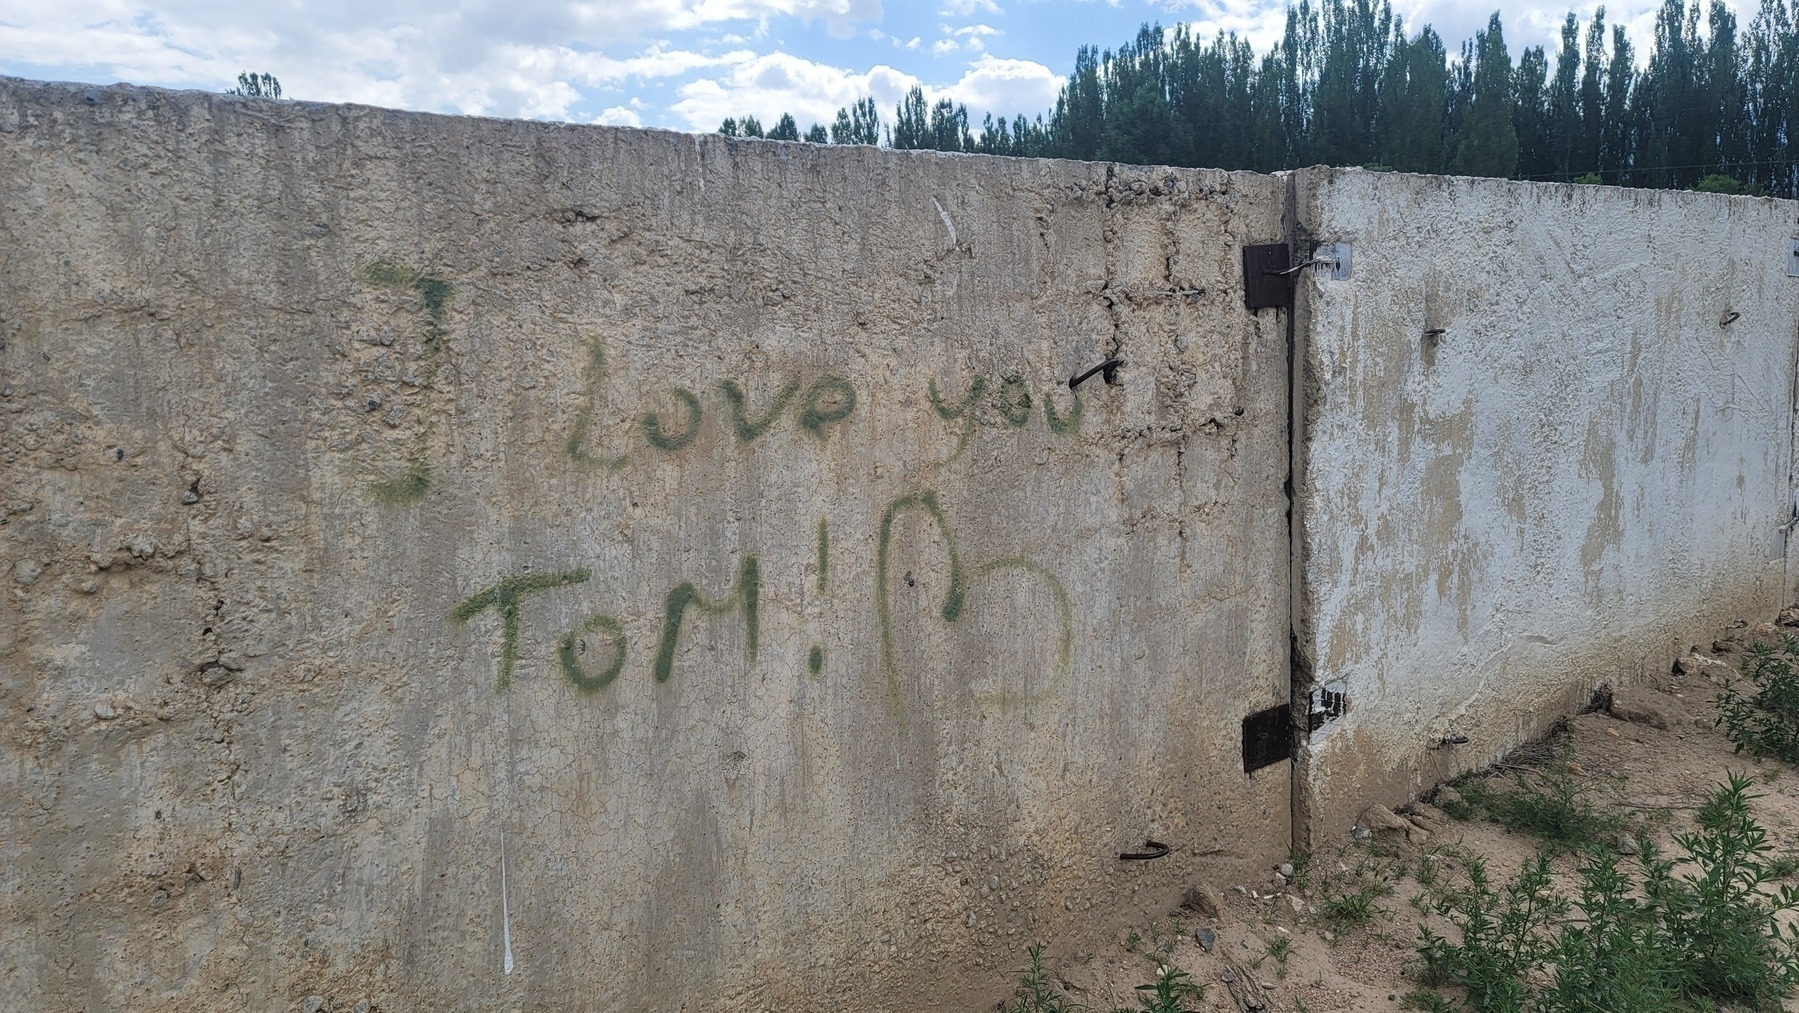 concrete barrier with "I love you Tom! (heart)" graffiti in now faded green paint